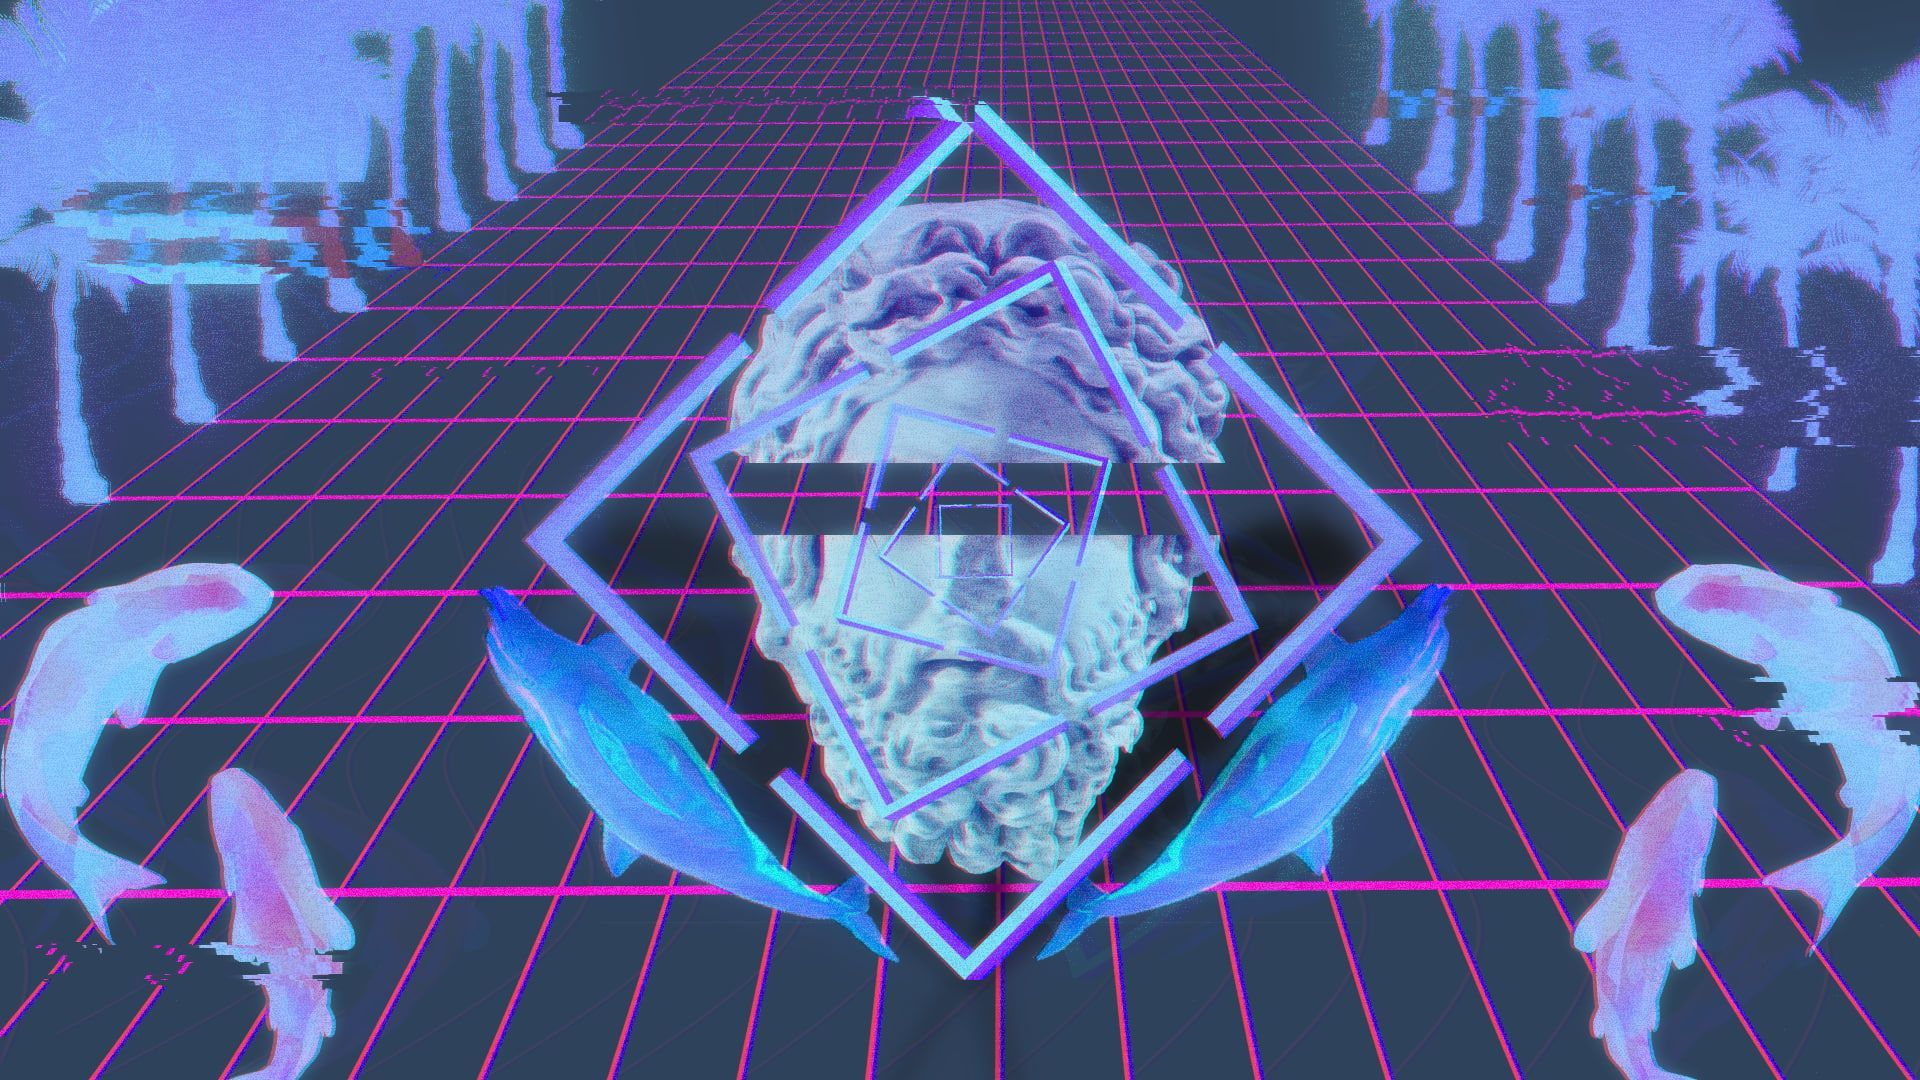 A digital image of a brain in a diamond-shaped frame, surrounded by fish and a grid background. - Glitch